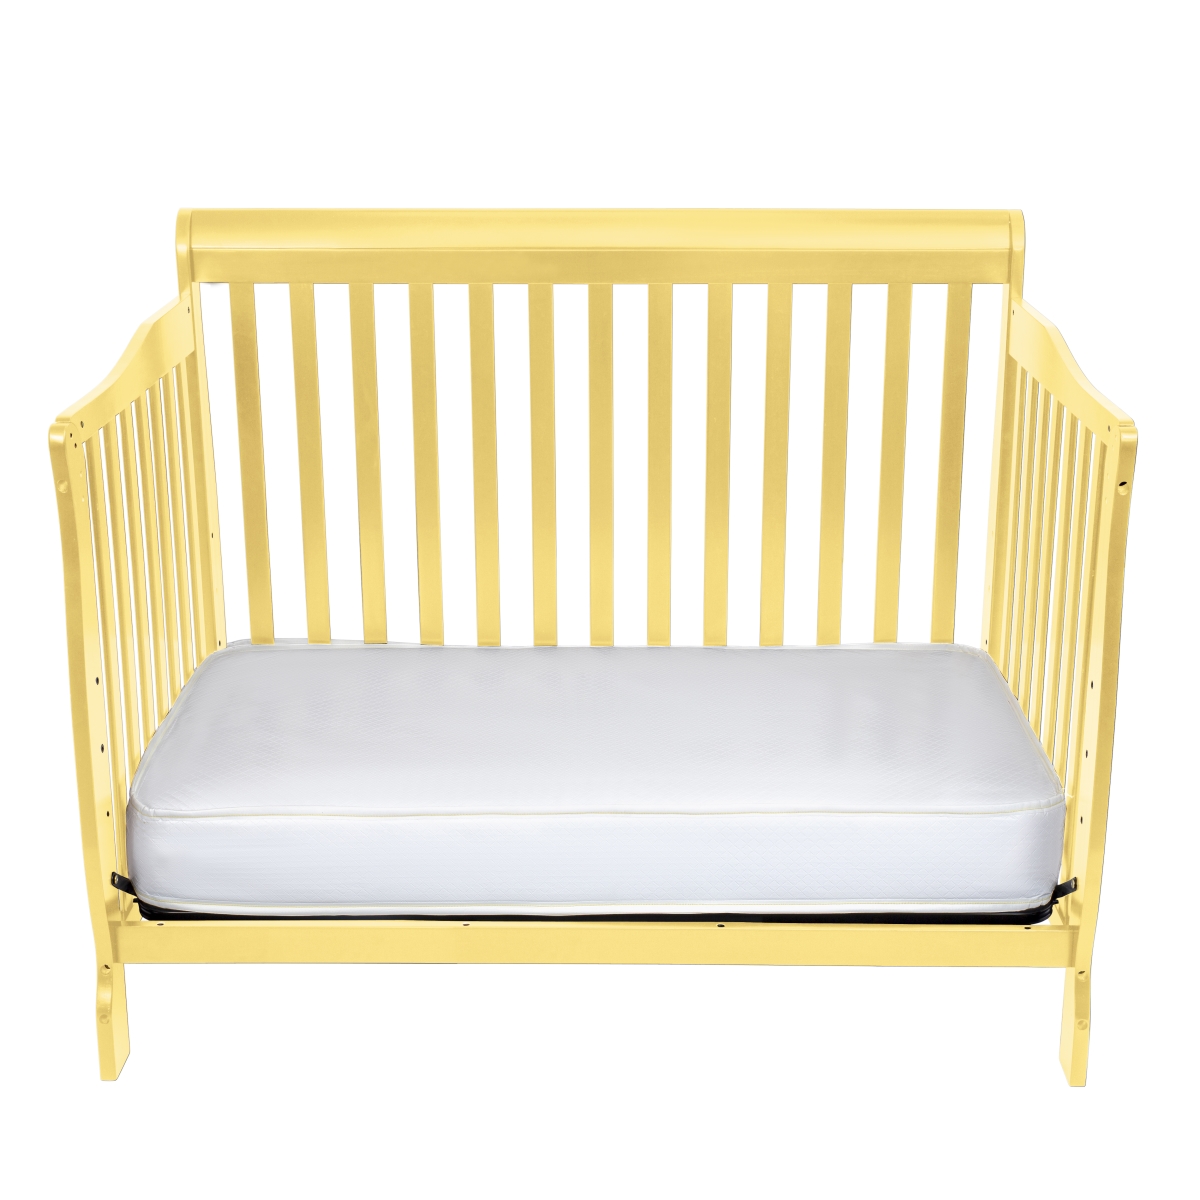 925-n 4 In 1 Crib 3 Positions, Natural - Full Size